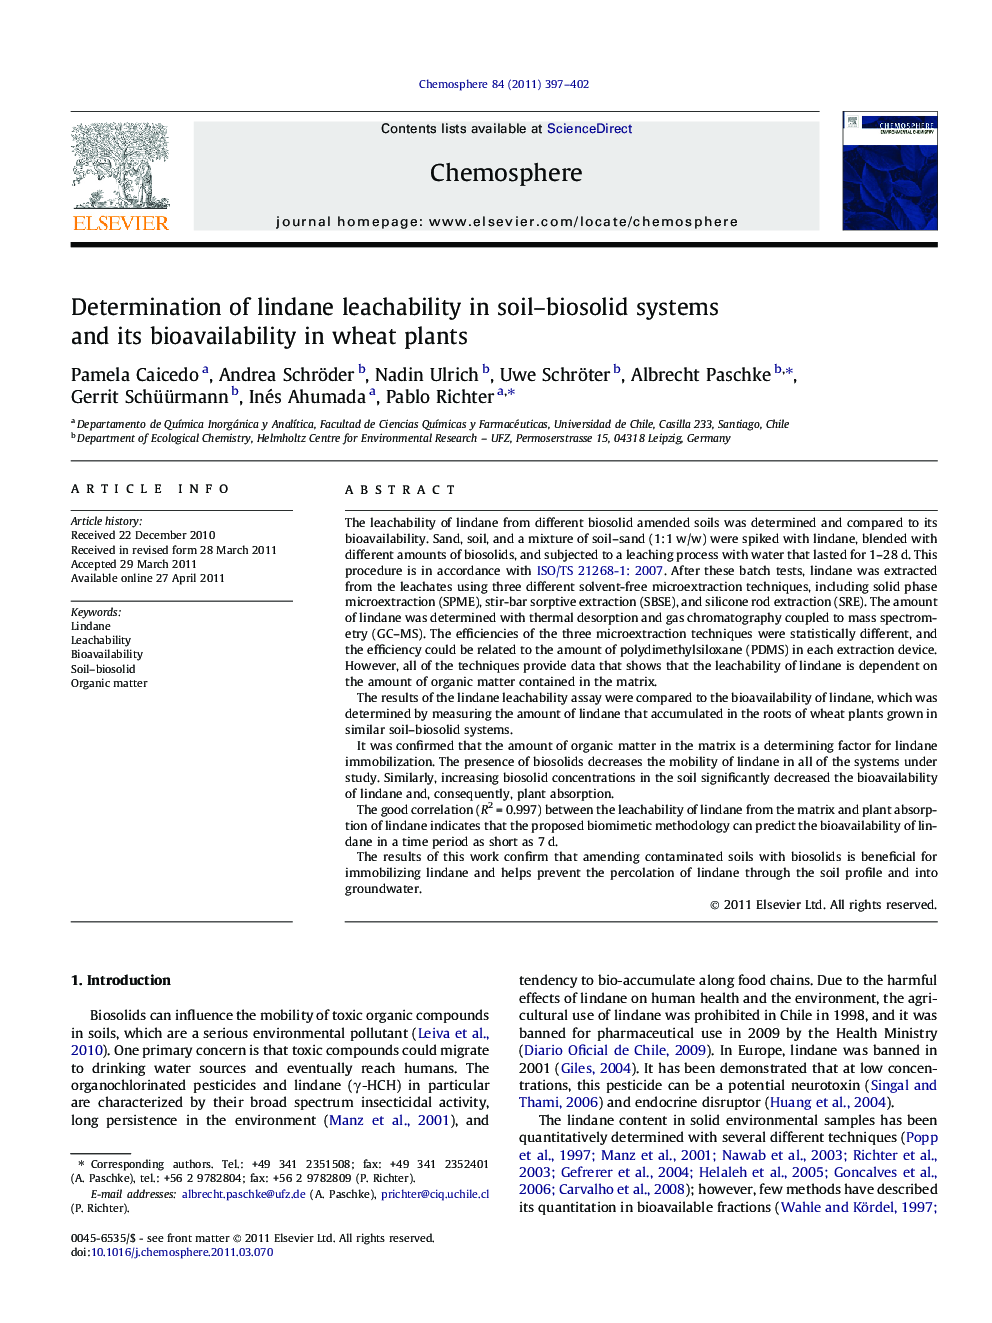 Determination of lindane leachability in soil–biosolid systems and its bioavailability in wheat plants